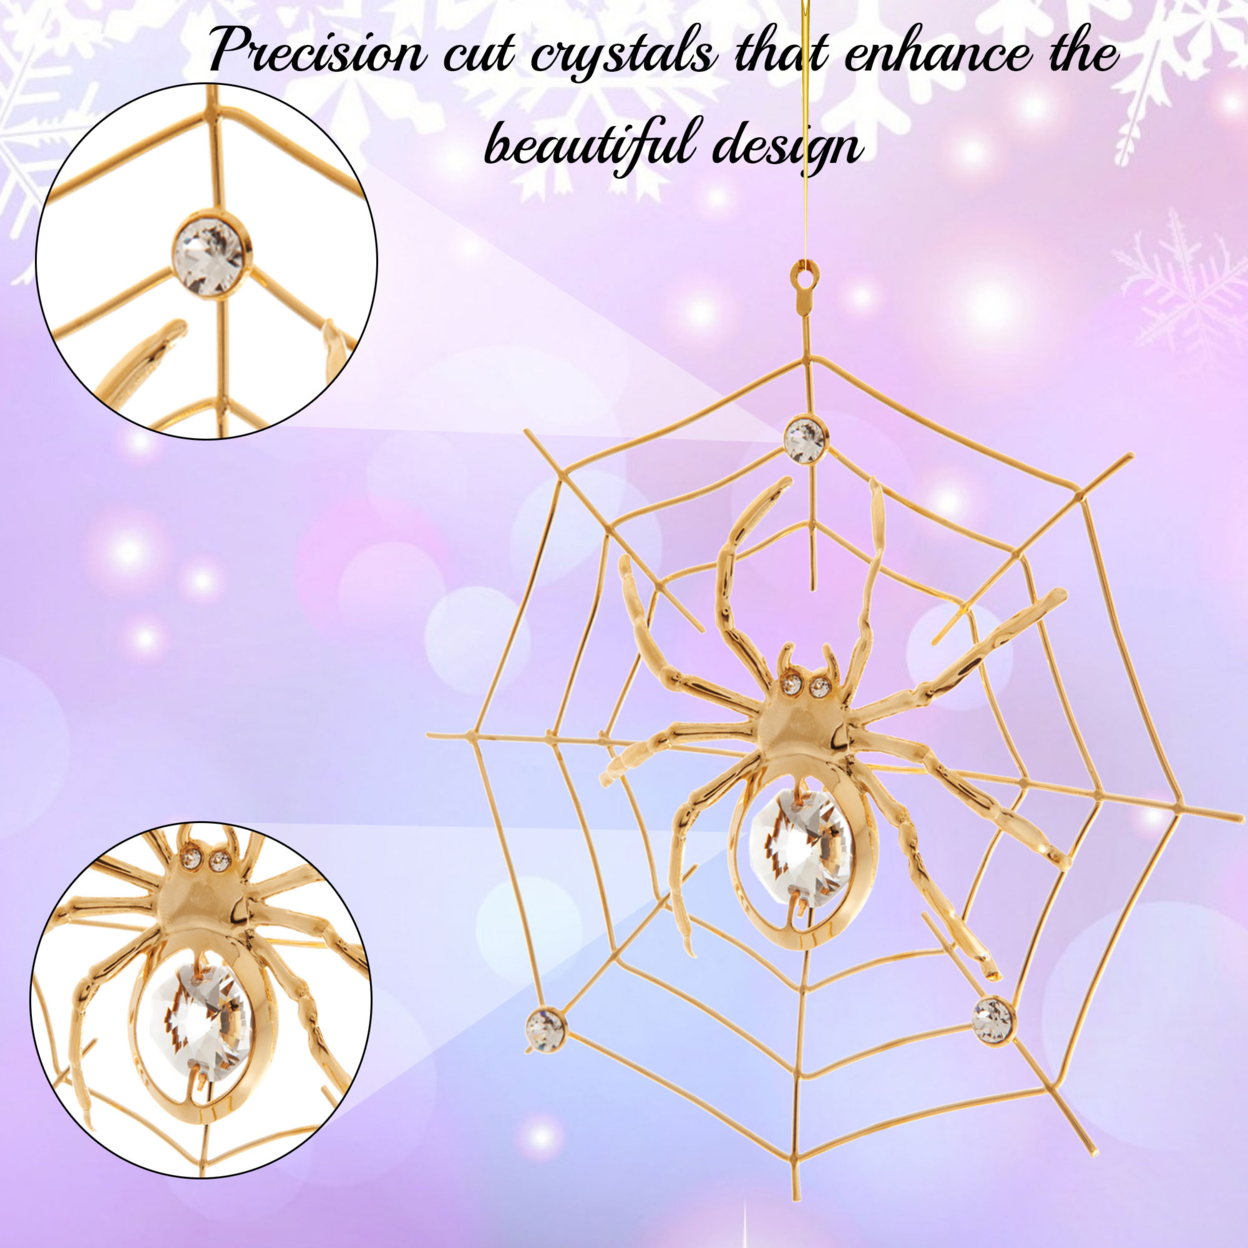 Matashi 24K Gold Plated Crystal Studded Spider On Web Hanging Ornaments For Christmas Tree, Christmas Spider Hanging Decor For Holiday